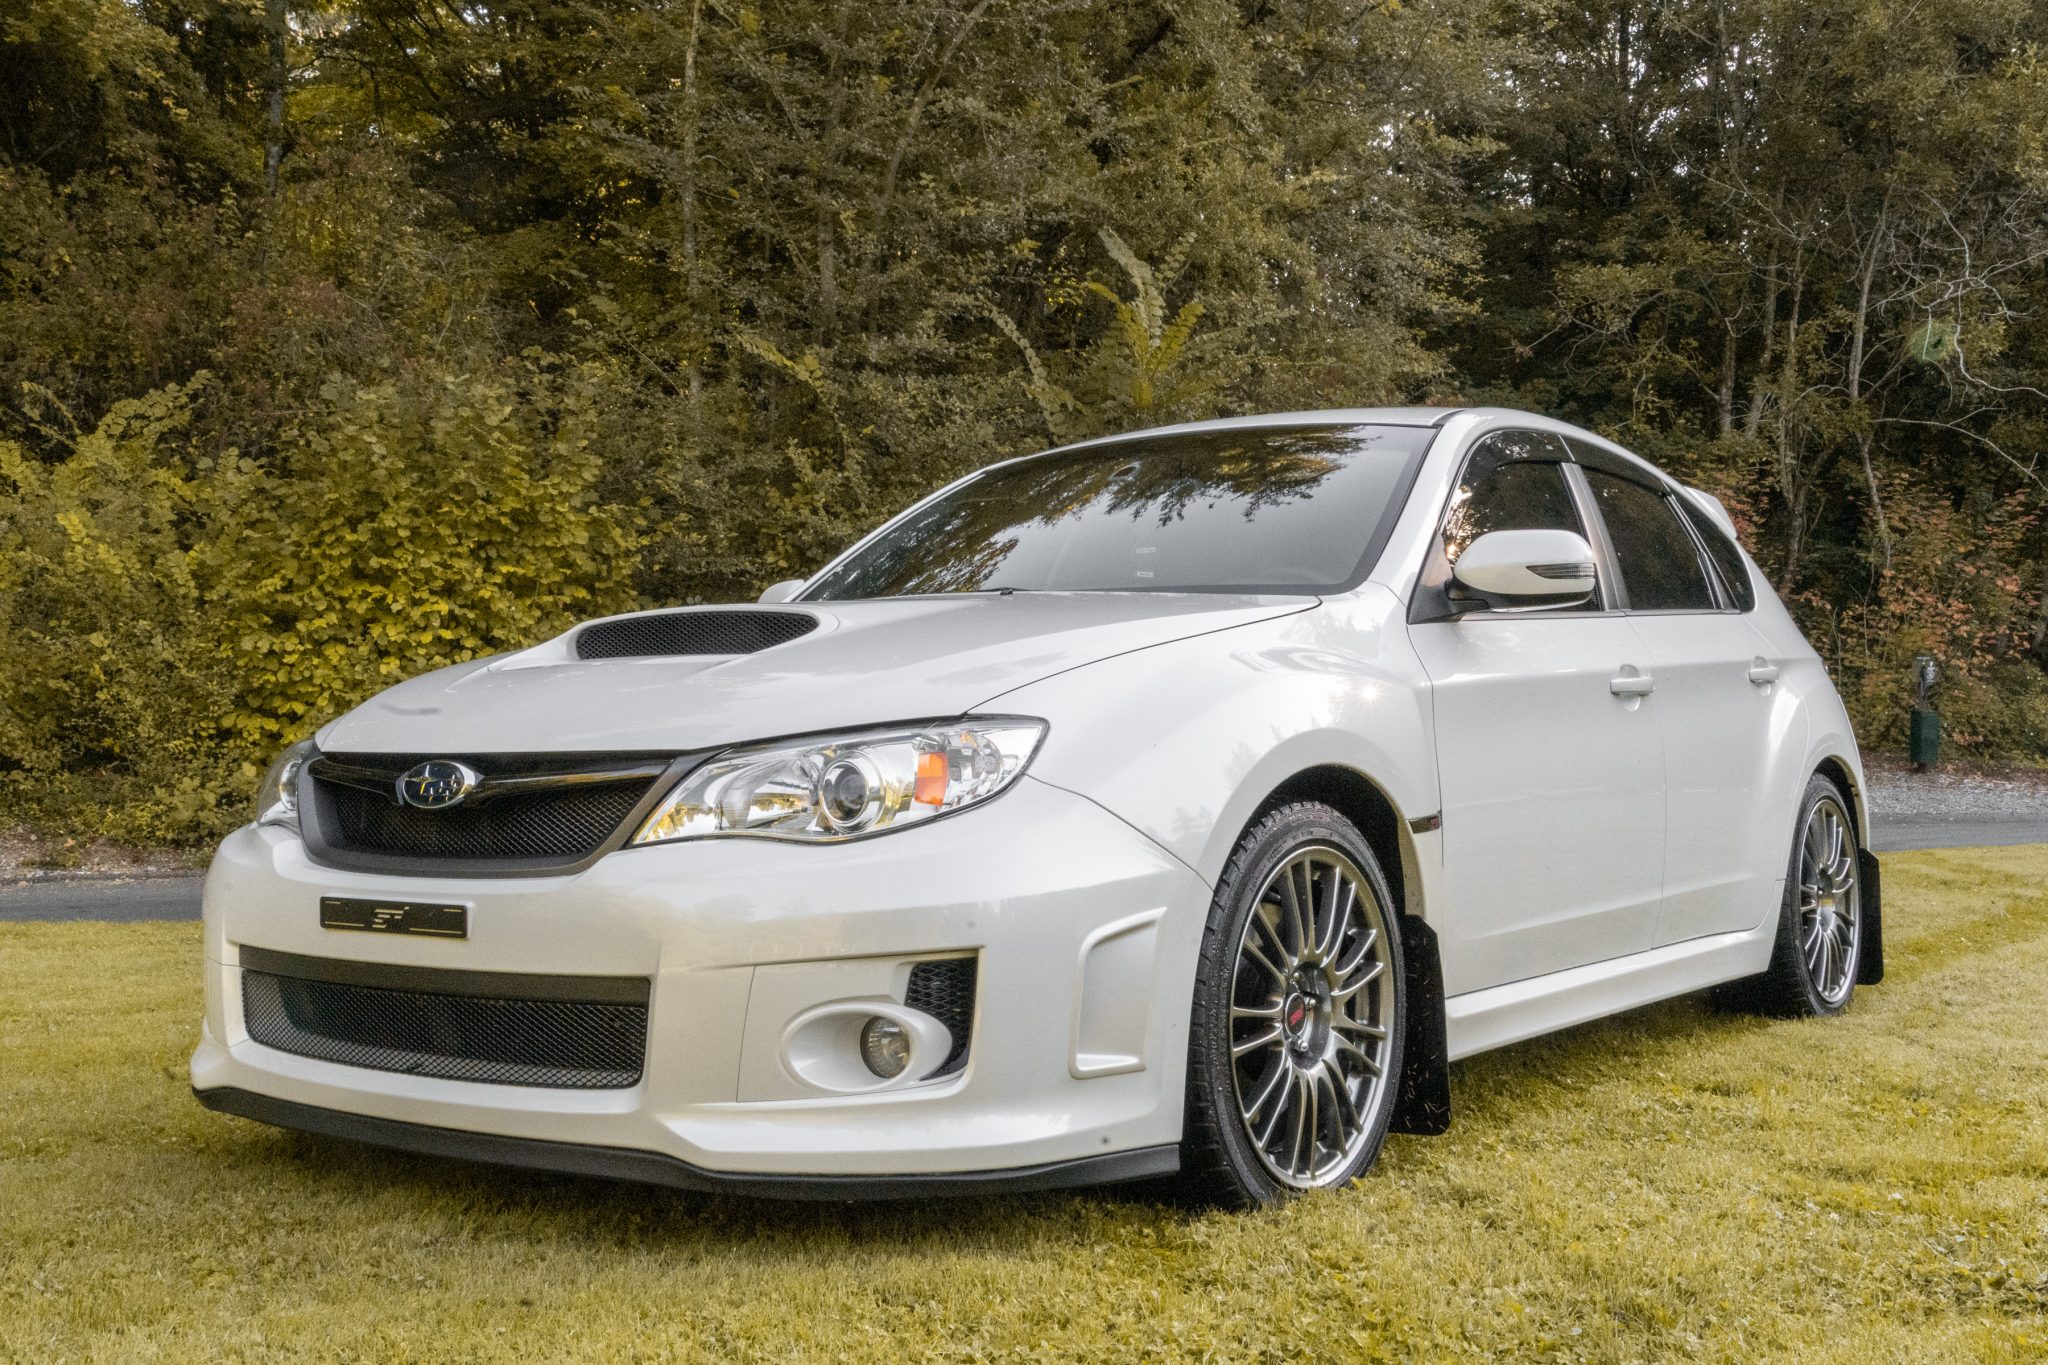 10k-Mile 2012 Subaru Impreza WRX STi 6-Speed for sale on BaT Auctions -  sold for $40,500 on November 11, 2021 (Lot #59,381) | Bring a Trailer